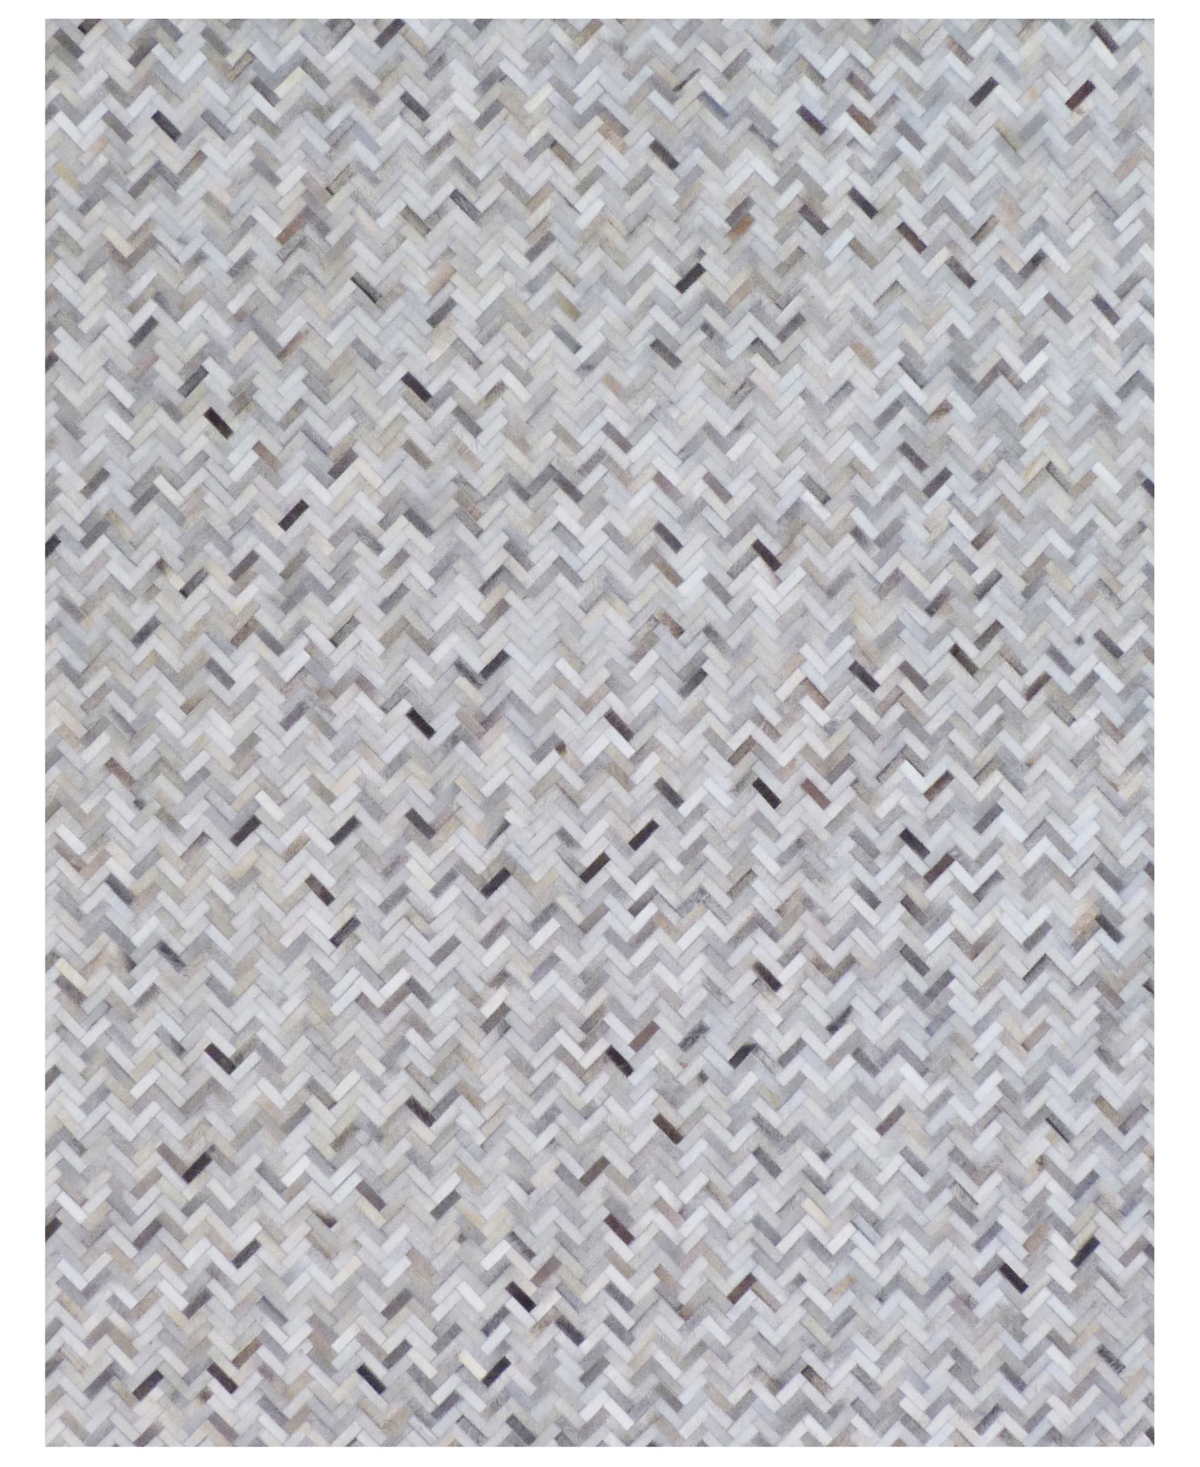 Exquisite Rugs Mosaic ER4056 8' x 11' Area Rug - Silver-Tone